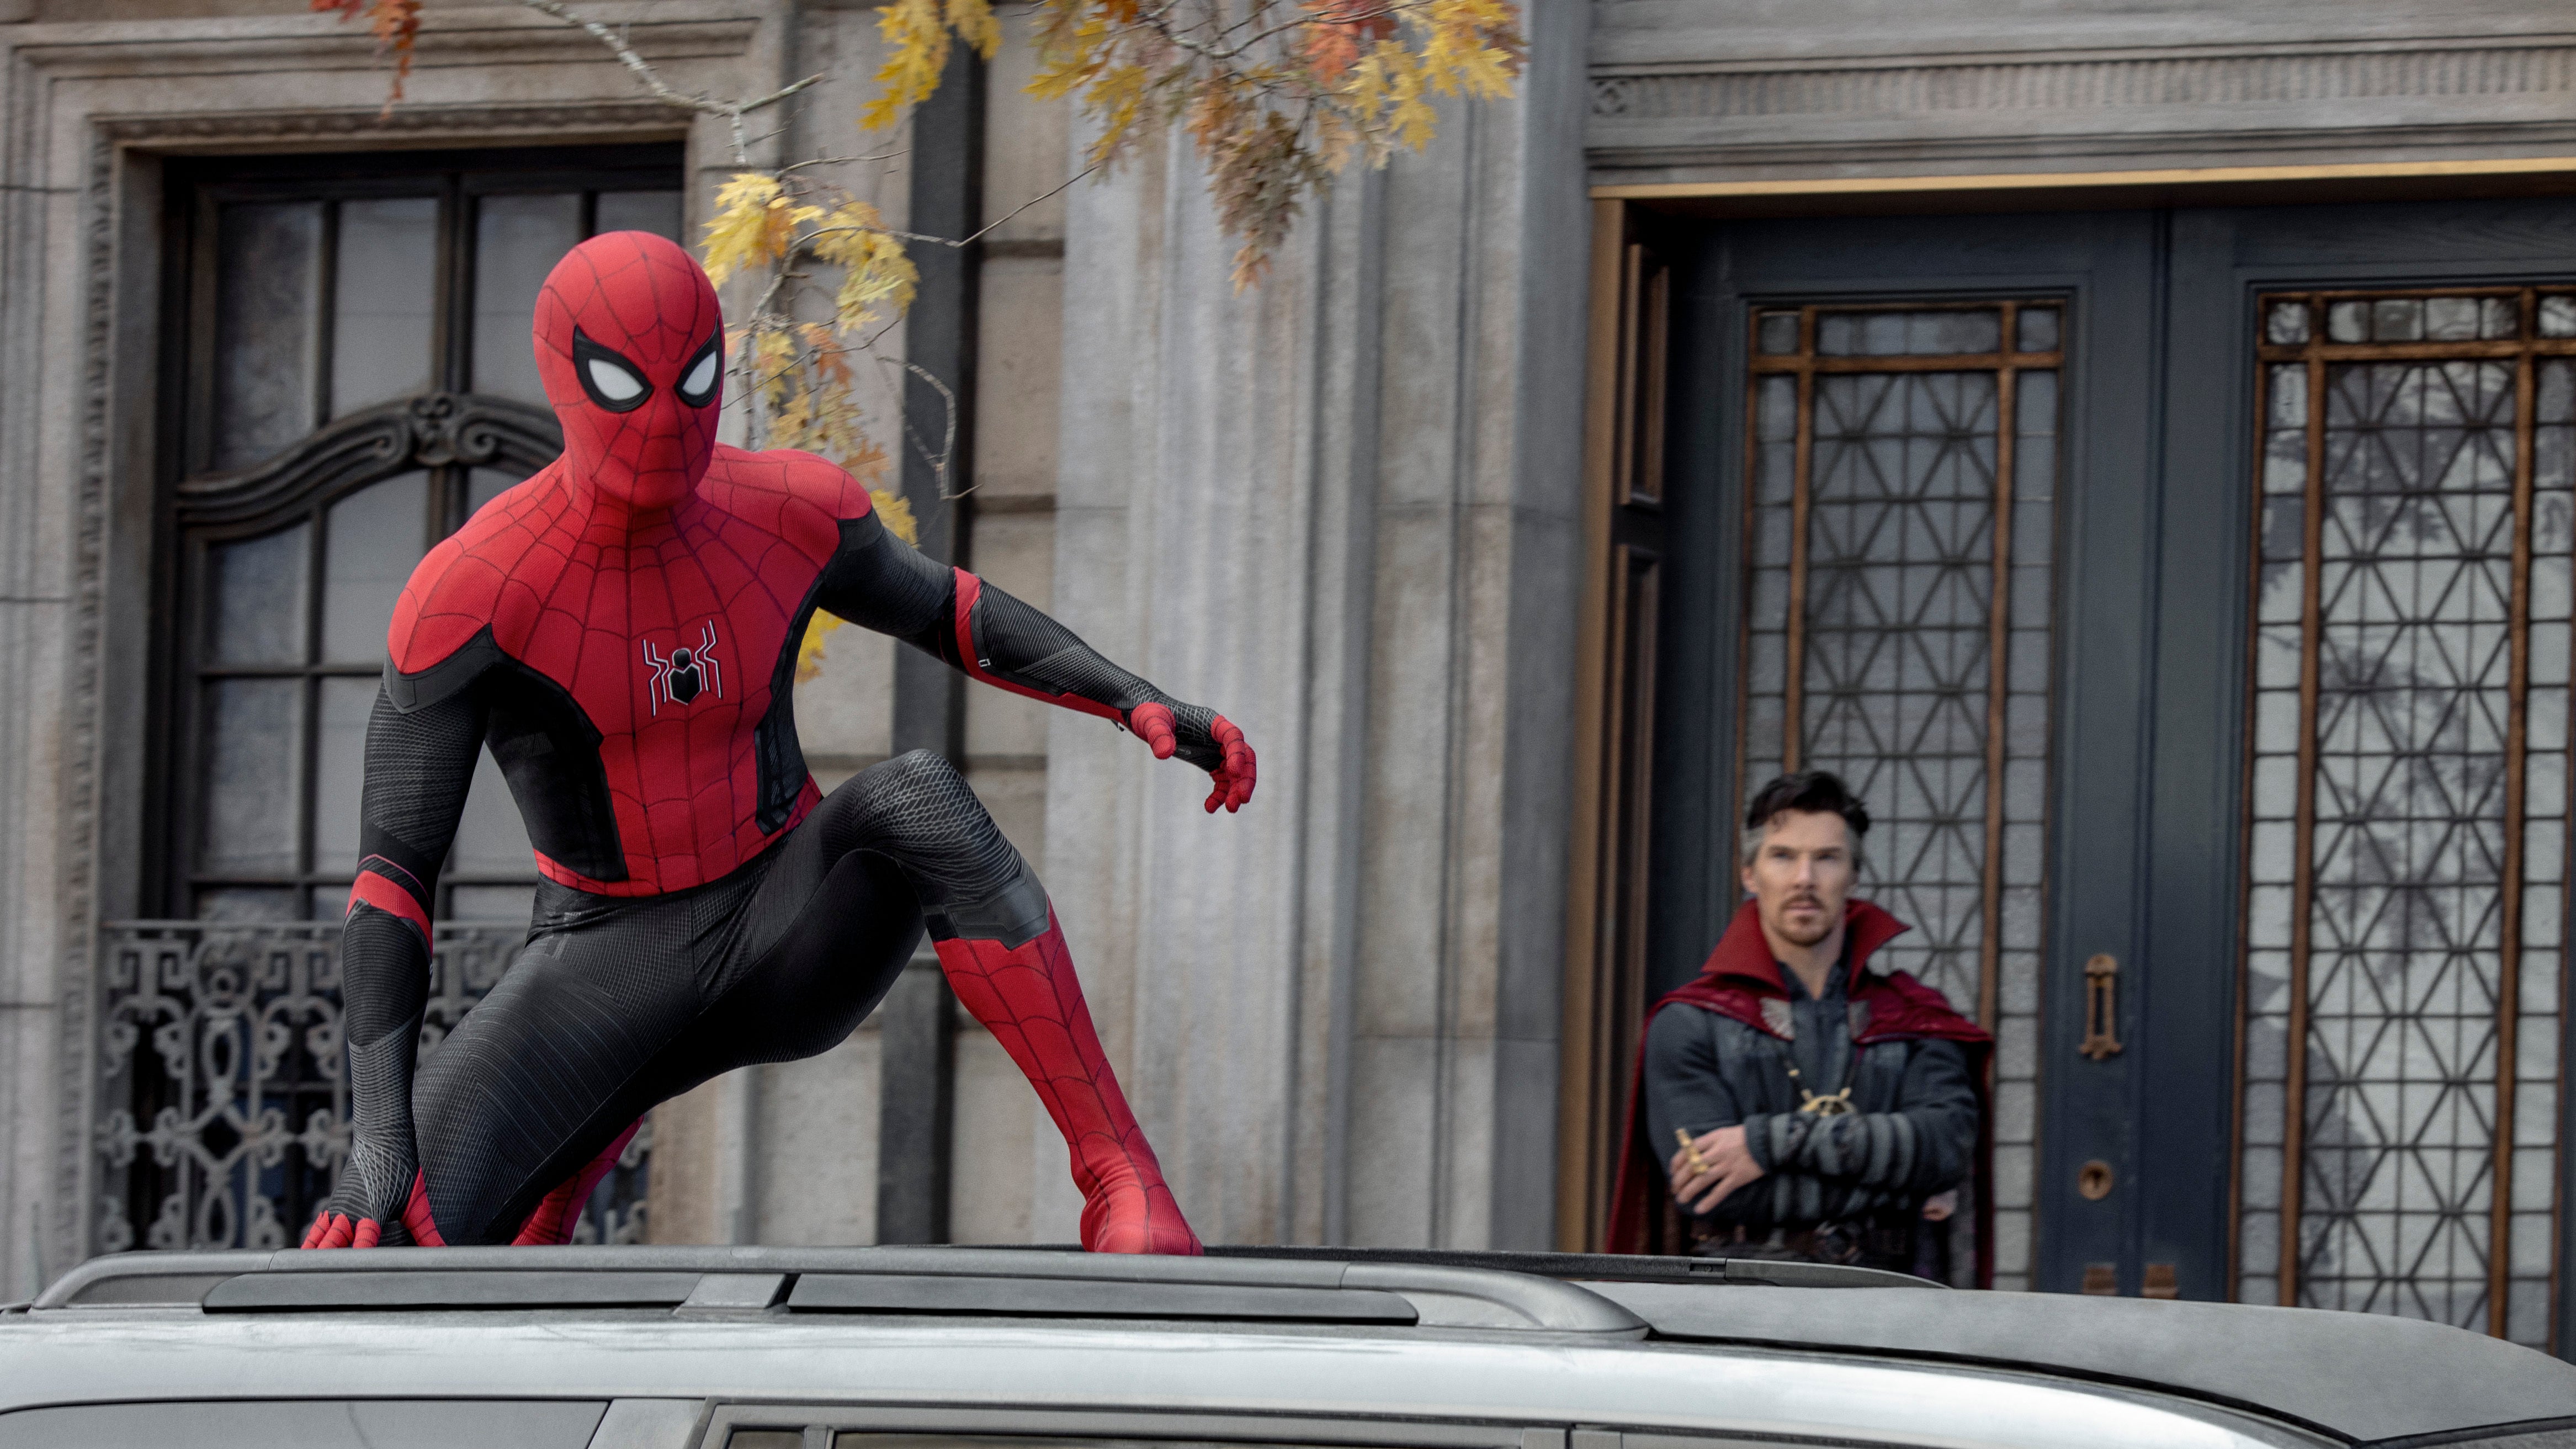 Spider-Man: No Way Home casting rumors are out of hand - Polygon